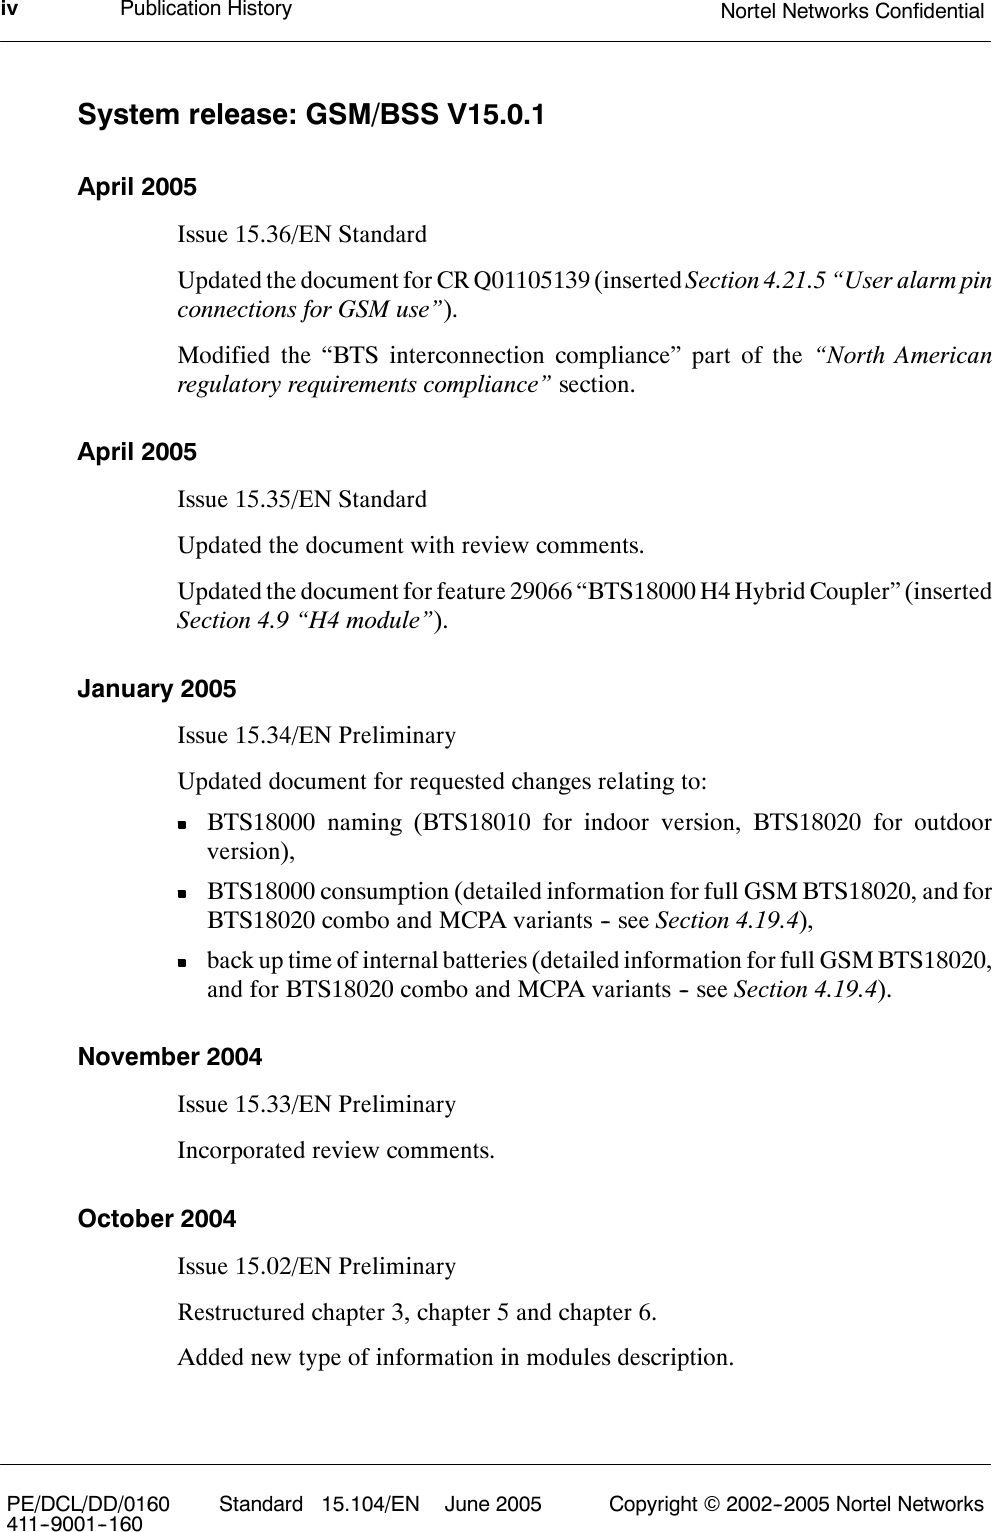 Publication History Nortel Networks ConfidentialivPE/DCL/DD/0160411--9001--160 Standard 15.104/EN June 2005 Copyright ©2002--2005 Nortel NetworksSystem release: GSM/BSS V15.0.1April 2005Issue 15.36/EN StandardUpdated the document for CR Q01105139 (inserted Section 4.21.5 “User alarm pinconnections for GSM use”).Modified the “BTS interconnection compliance” part of the “North Americanregulatory requirements compliance” section.April 2005Issue 15.35/EN StandardUpdated the document with review comments.Updated the document for feature 29066 “BTS18000 H4 Hybrid Coupler” (insertedSection 4.9 “H4 module”).January 2005Issue 15.34/EN PreliminaryUpdated document for requested changes relating to:BTS18000 naming (BTS18010 for indoor version, BTS18020 for outdoorversion),BTS18000 consumption (detailed information for full GSM BTS18020, and forBTS18020 combo and MCPA variants -- see Section 4.19.4),back up time of internal batteries (detailed information for full GSM BTS18020,and for BTS18020 combo and MCPA variants -- see Section 4.19.4).November 2004Issue 15.33/EN PreliminaryIncorporated review comments.October 2004Issue 15.02/EN PreliminaryRestructured chapter 3, chapter 5 and chapter 6.Added new type of information in modules description.